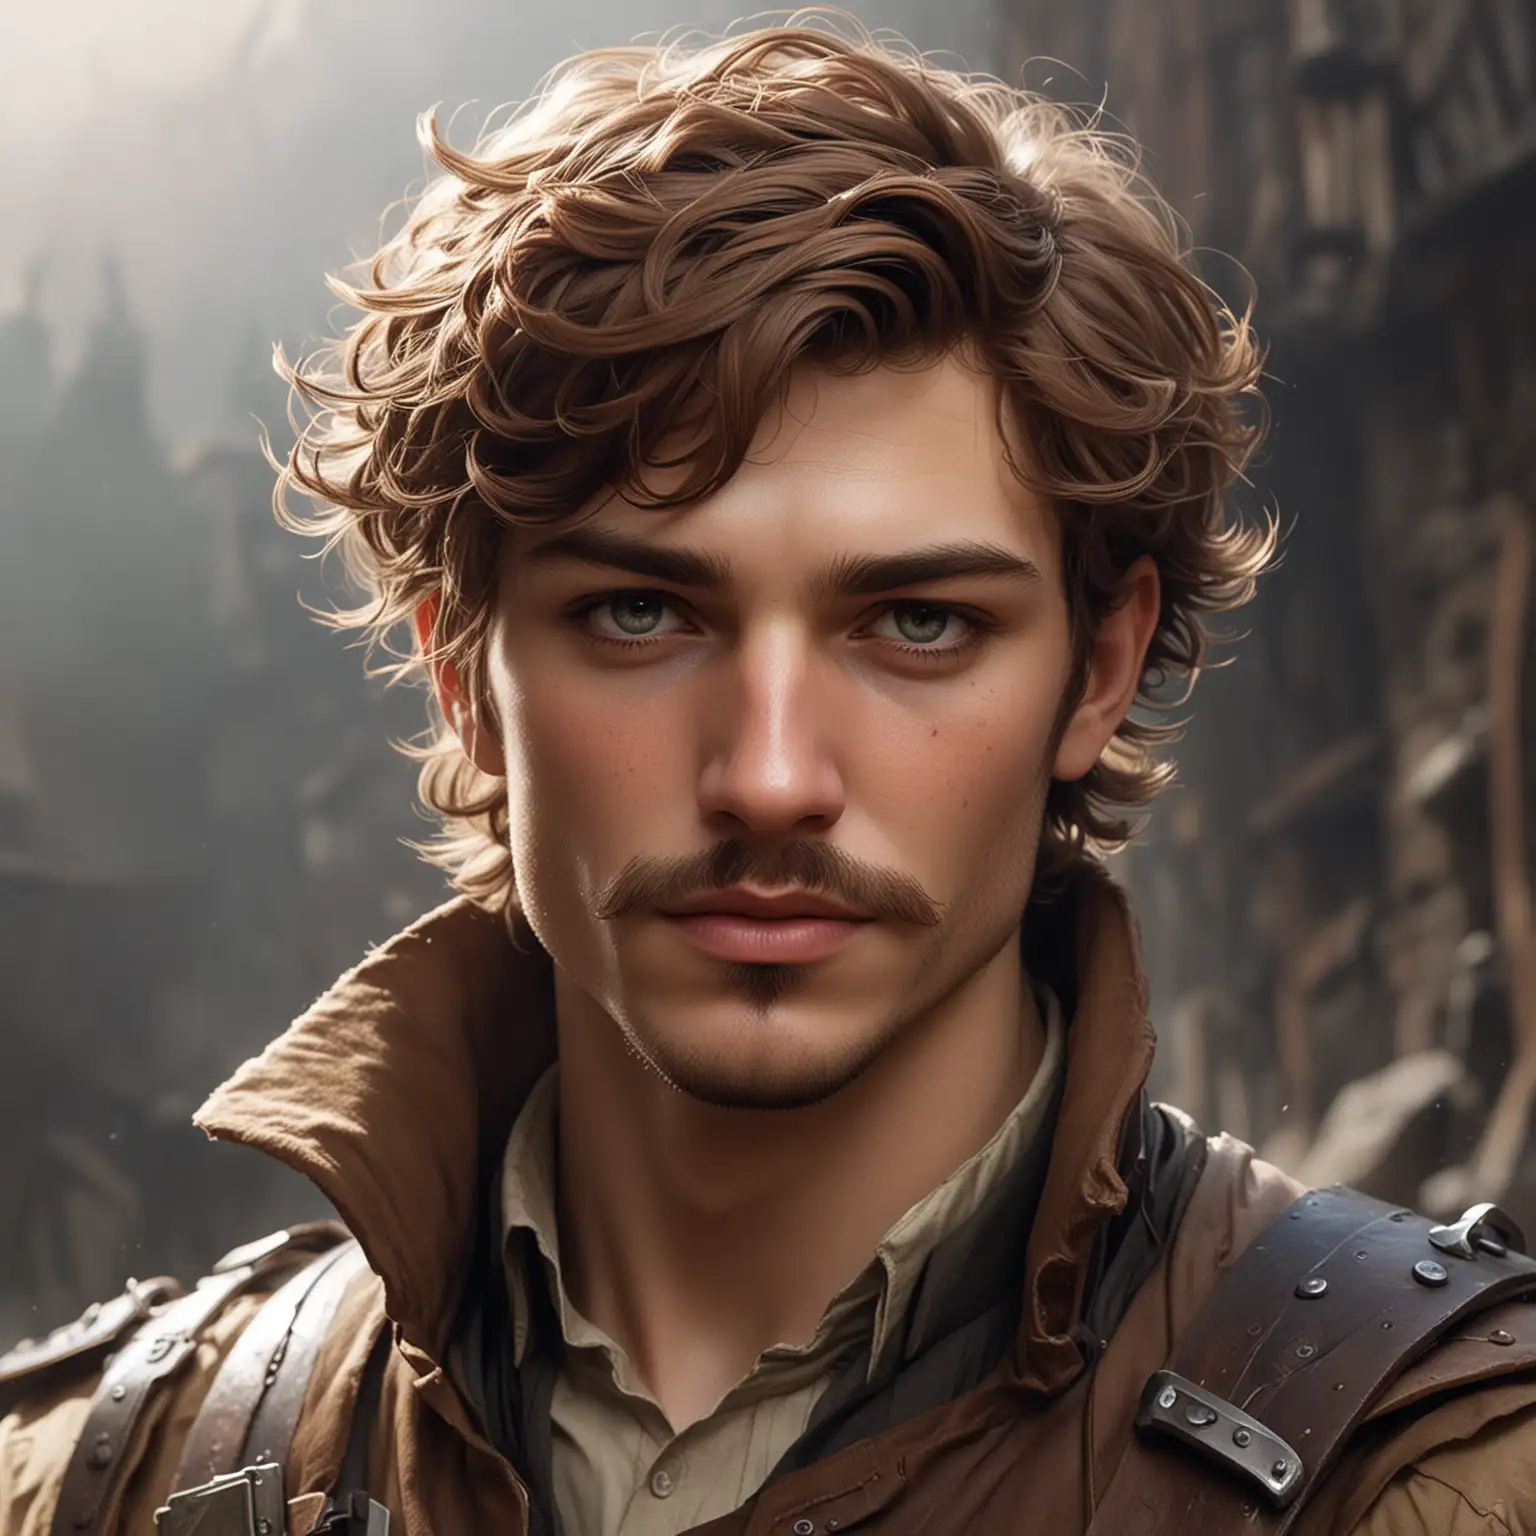 Fantasy Rogue with Curled Mustache Portrait Artwork